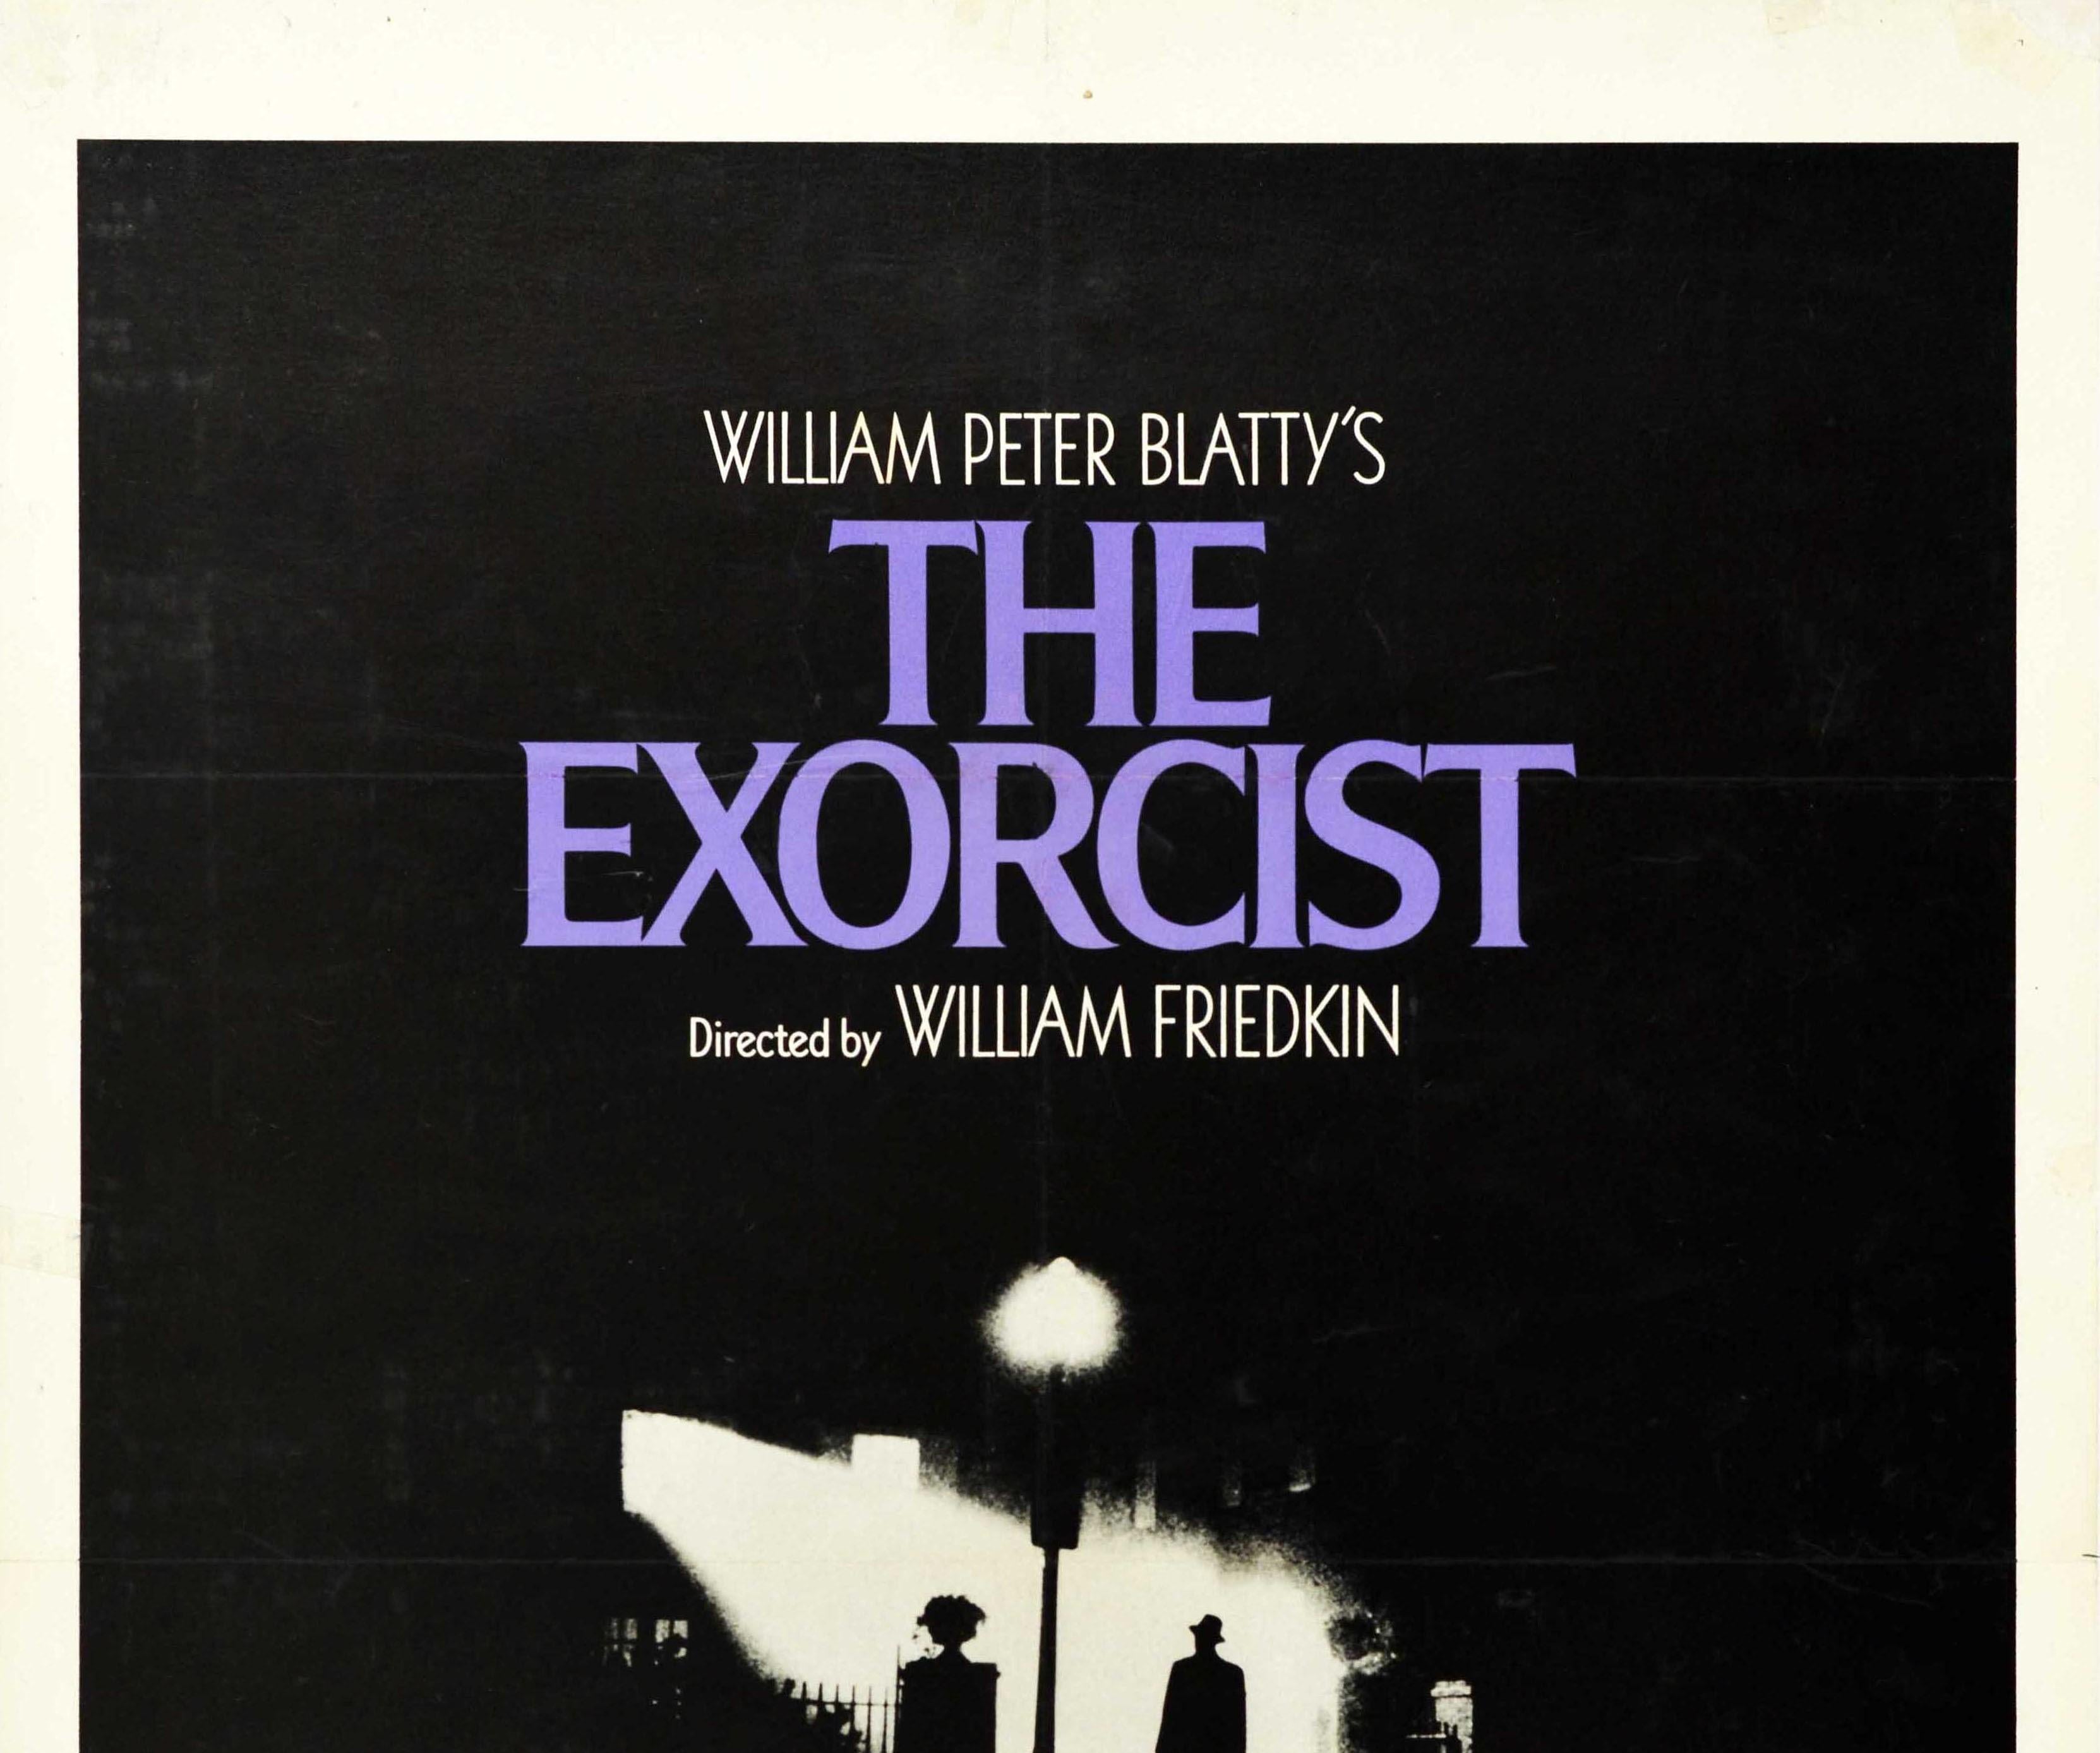 Original Vintage Film Poster The Exorcist X Rated Supernatural Horror Movie Art - Print by Bill Gold